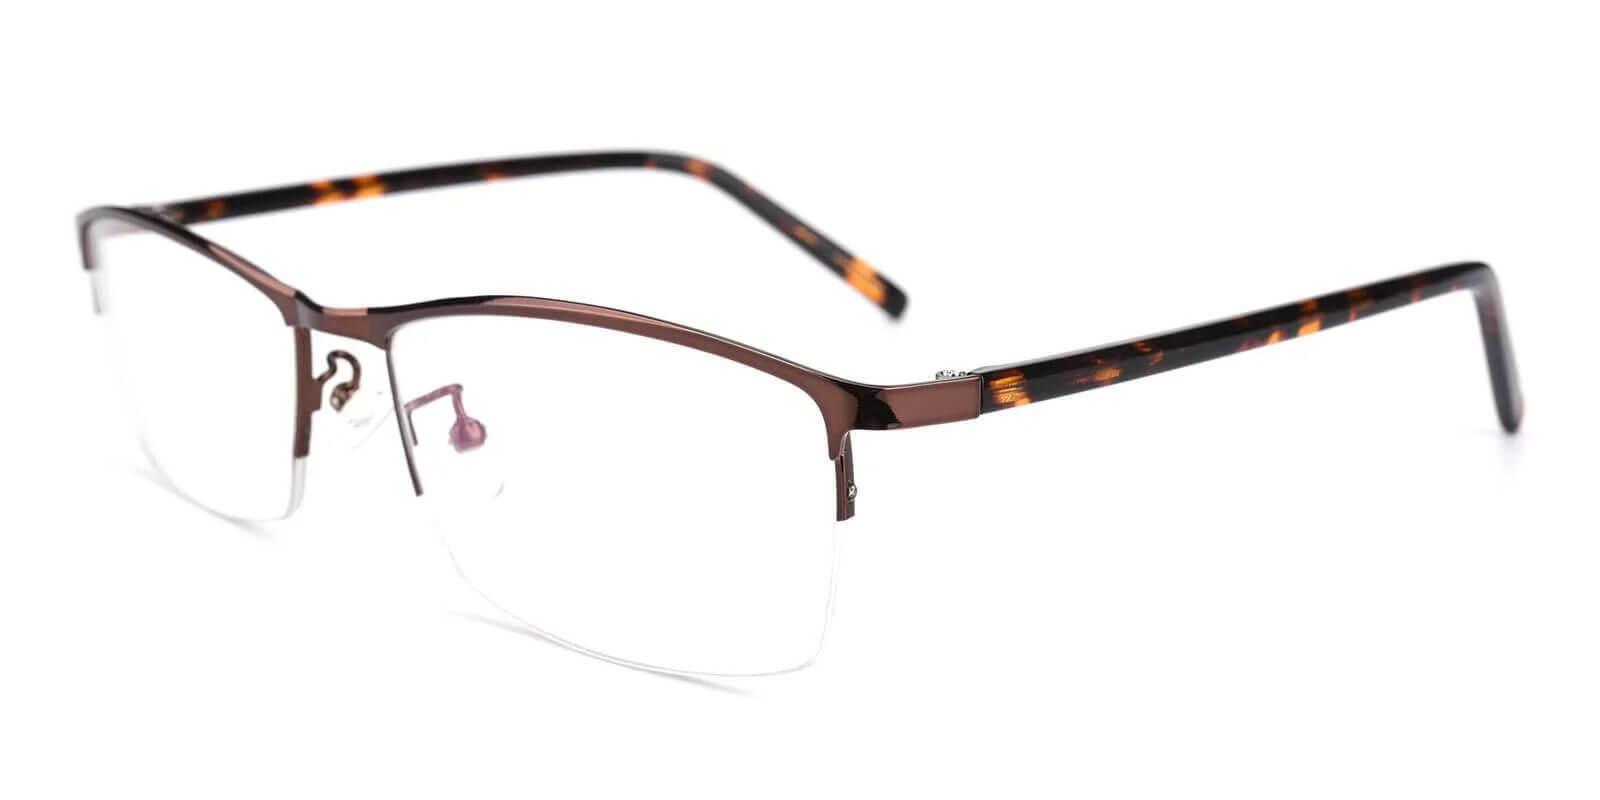 William Brown Metal Eyeglasses , NosePads Frames from ABBE Glasses